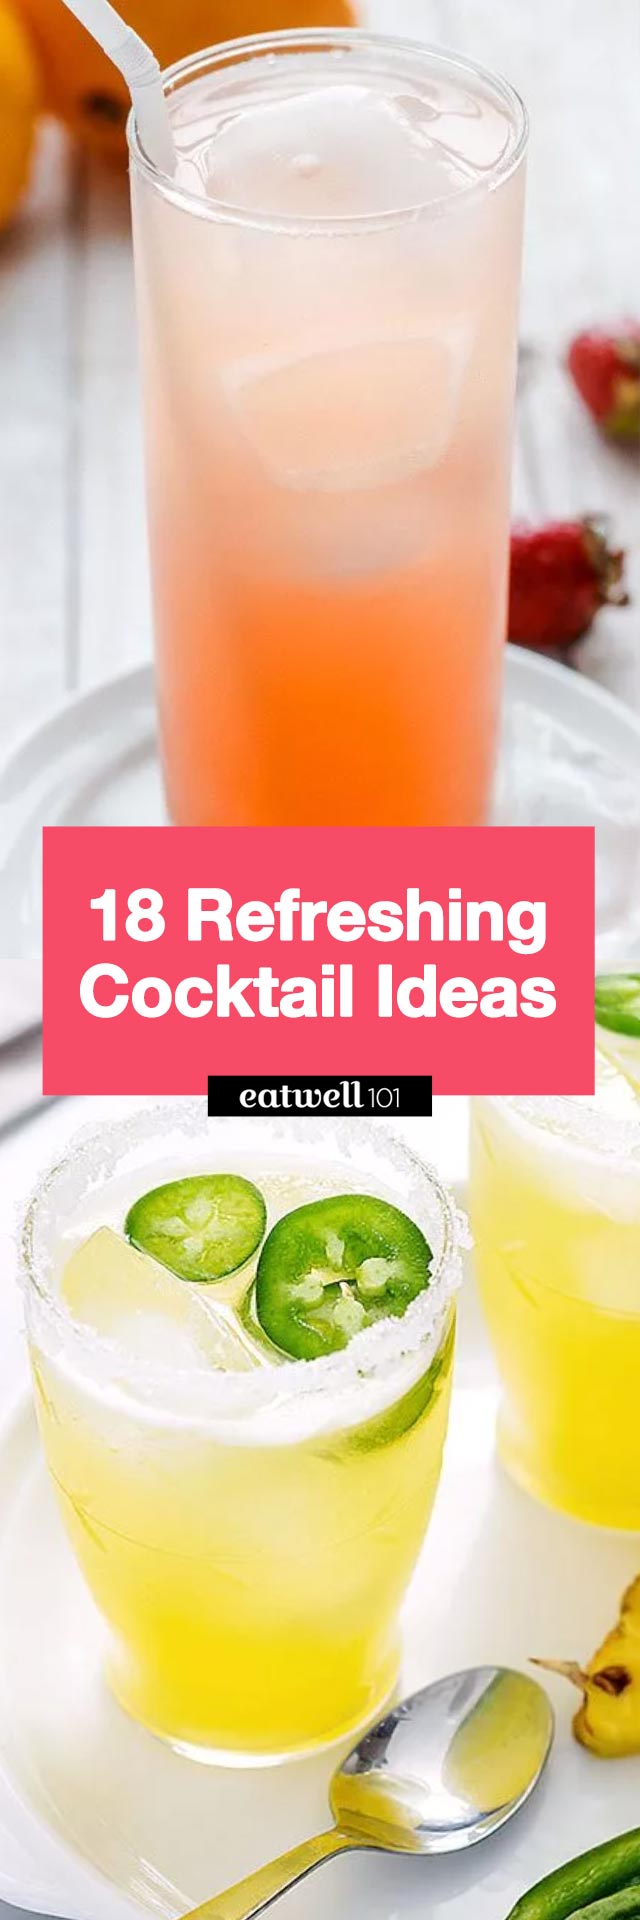 Summer Cocktail Recipes - #summer #cocktail #drink #recipes #eatwell101 - These easy summer cocktails will help you keep your company and yourself deliciously refreshed!